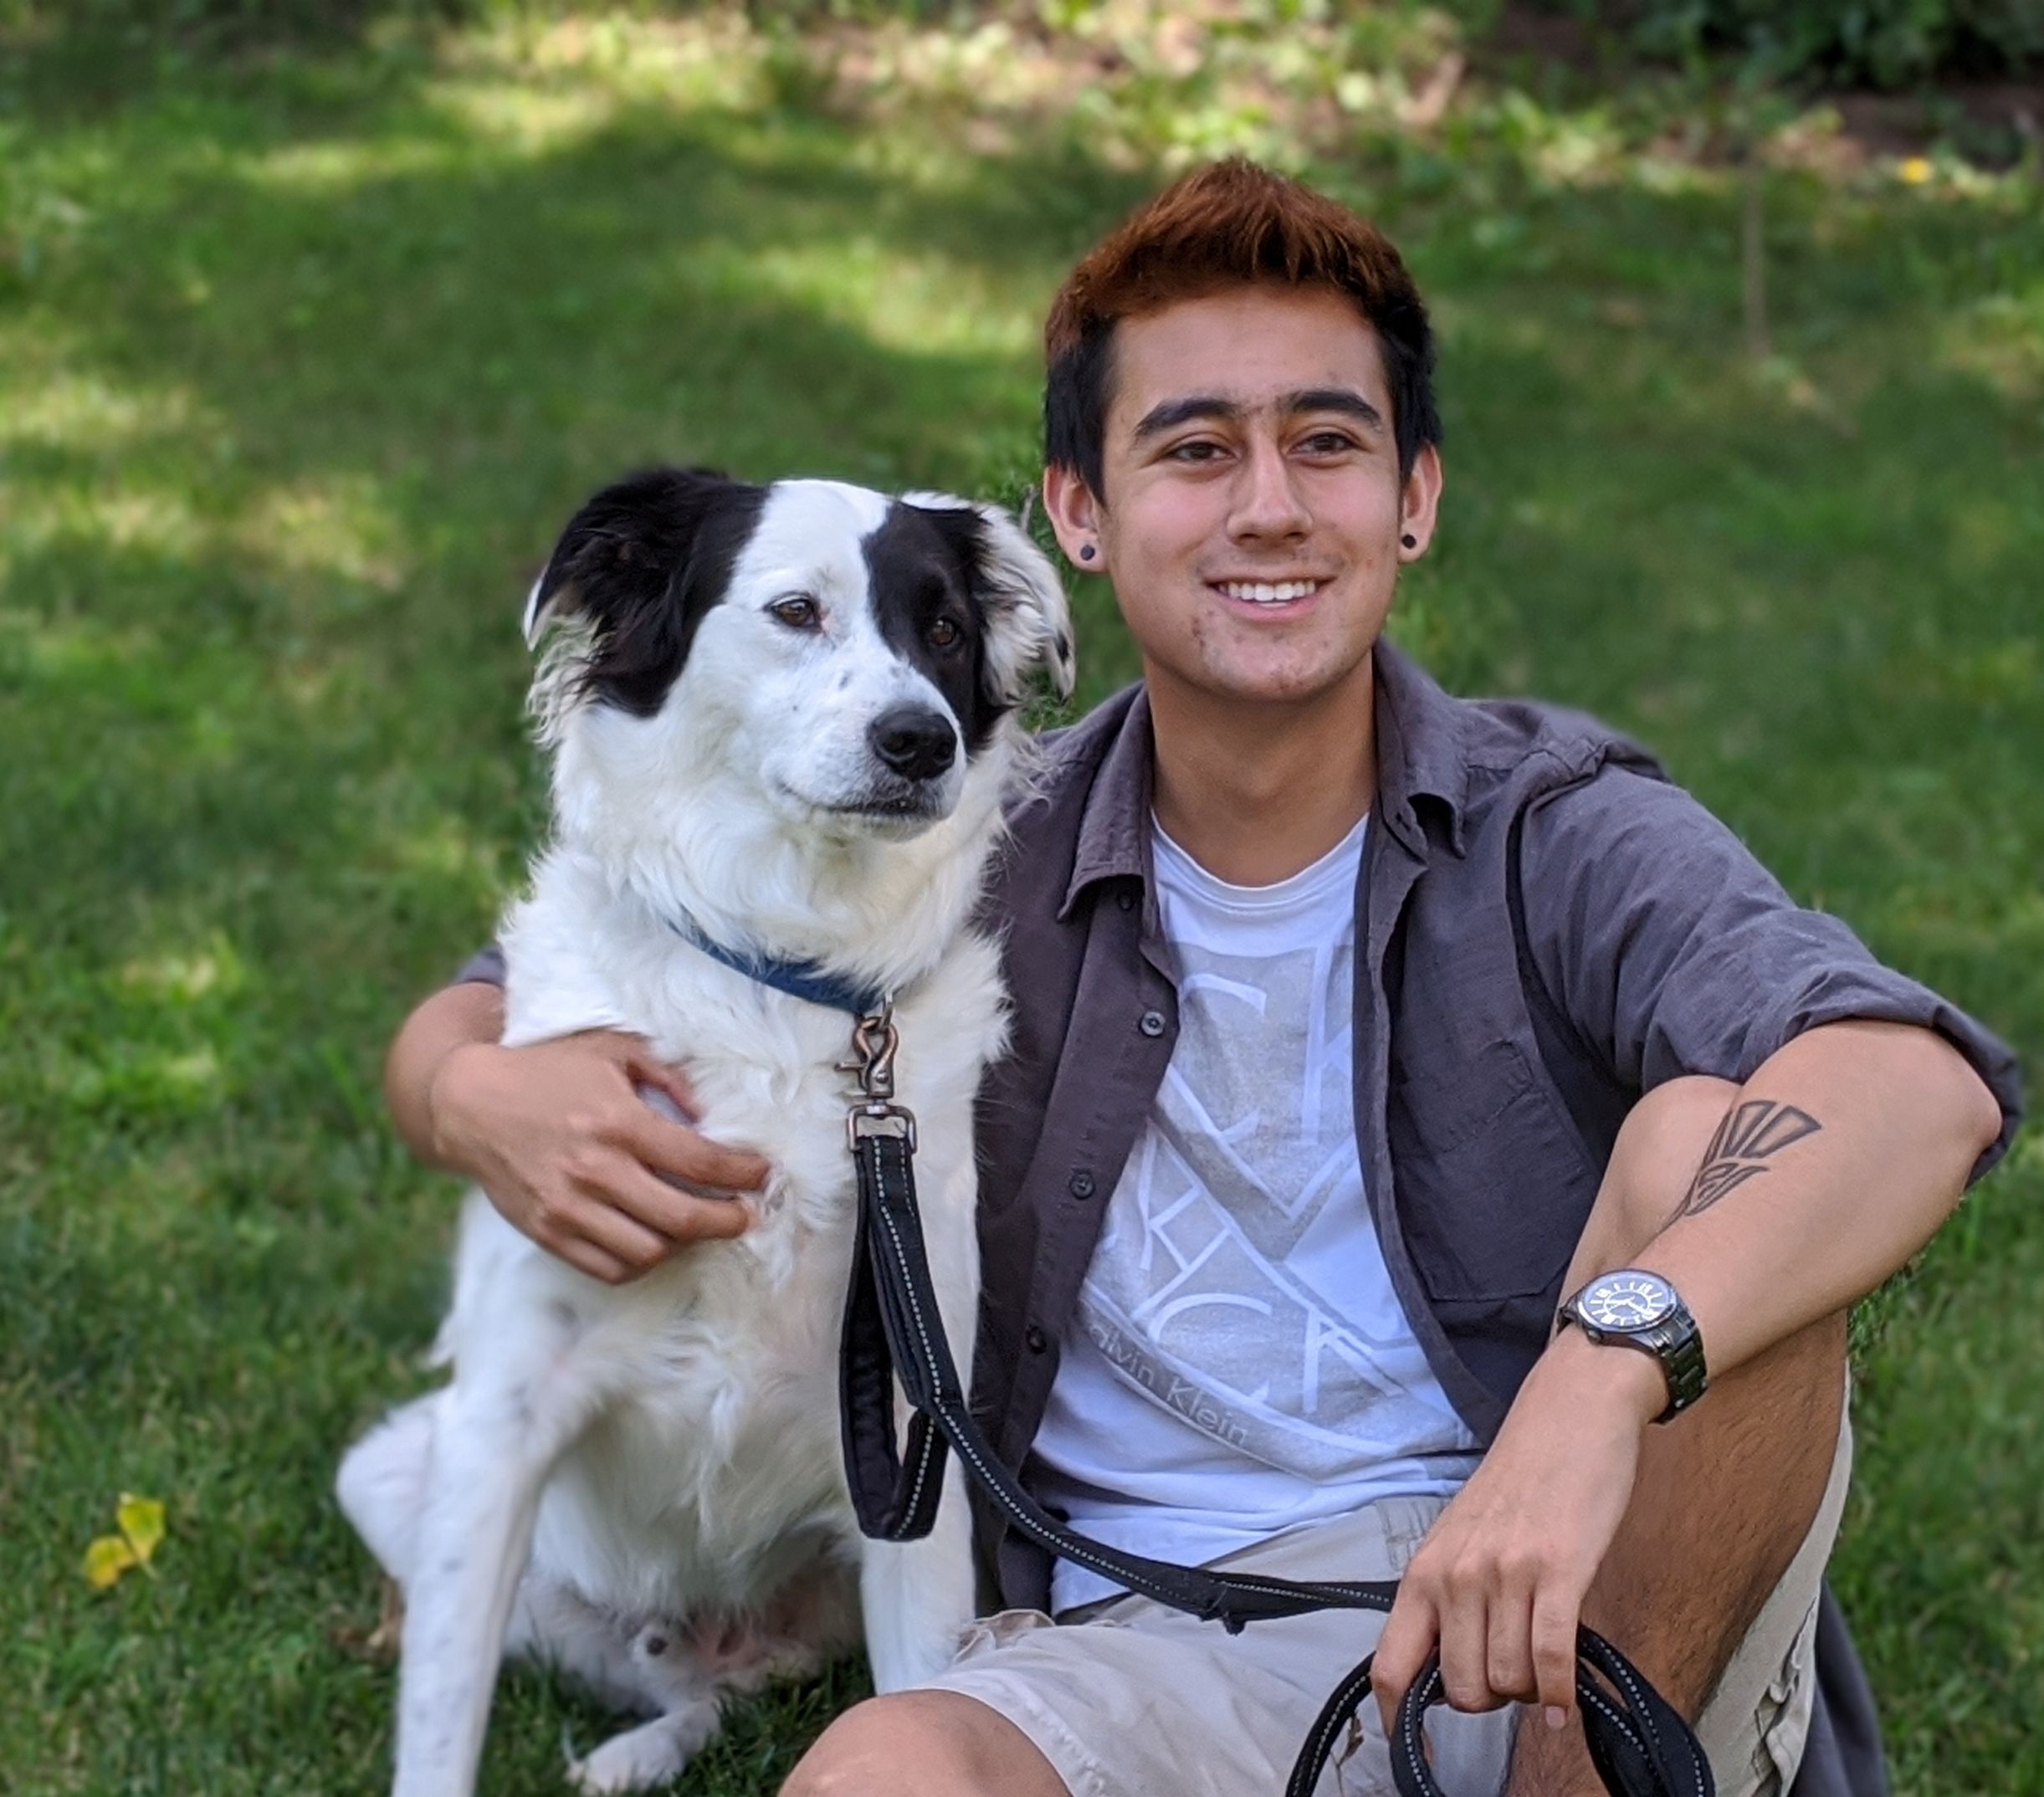 A smiling young man sits on the grass with his arm around a white and black dog.